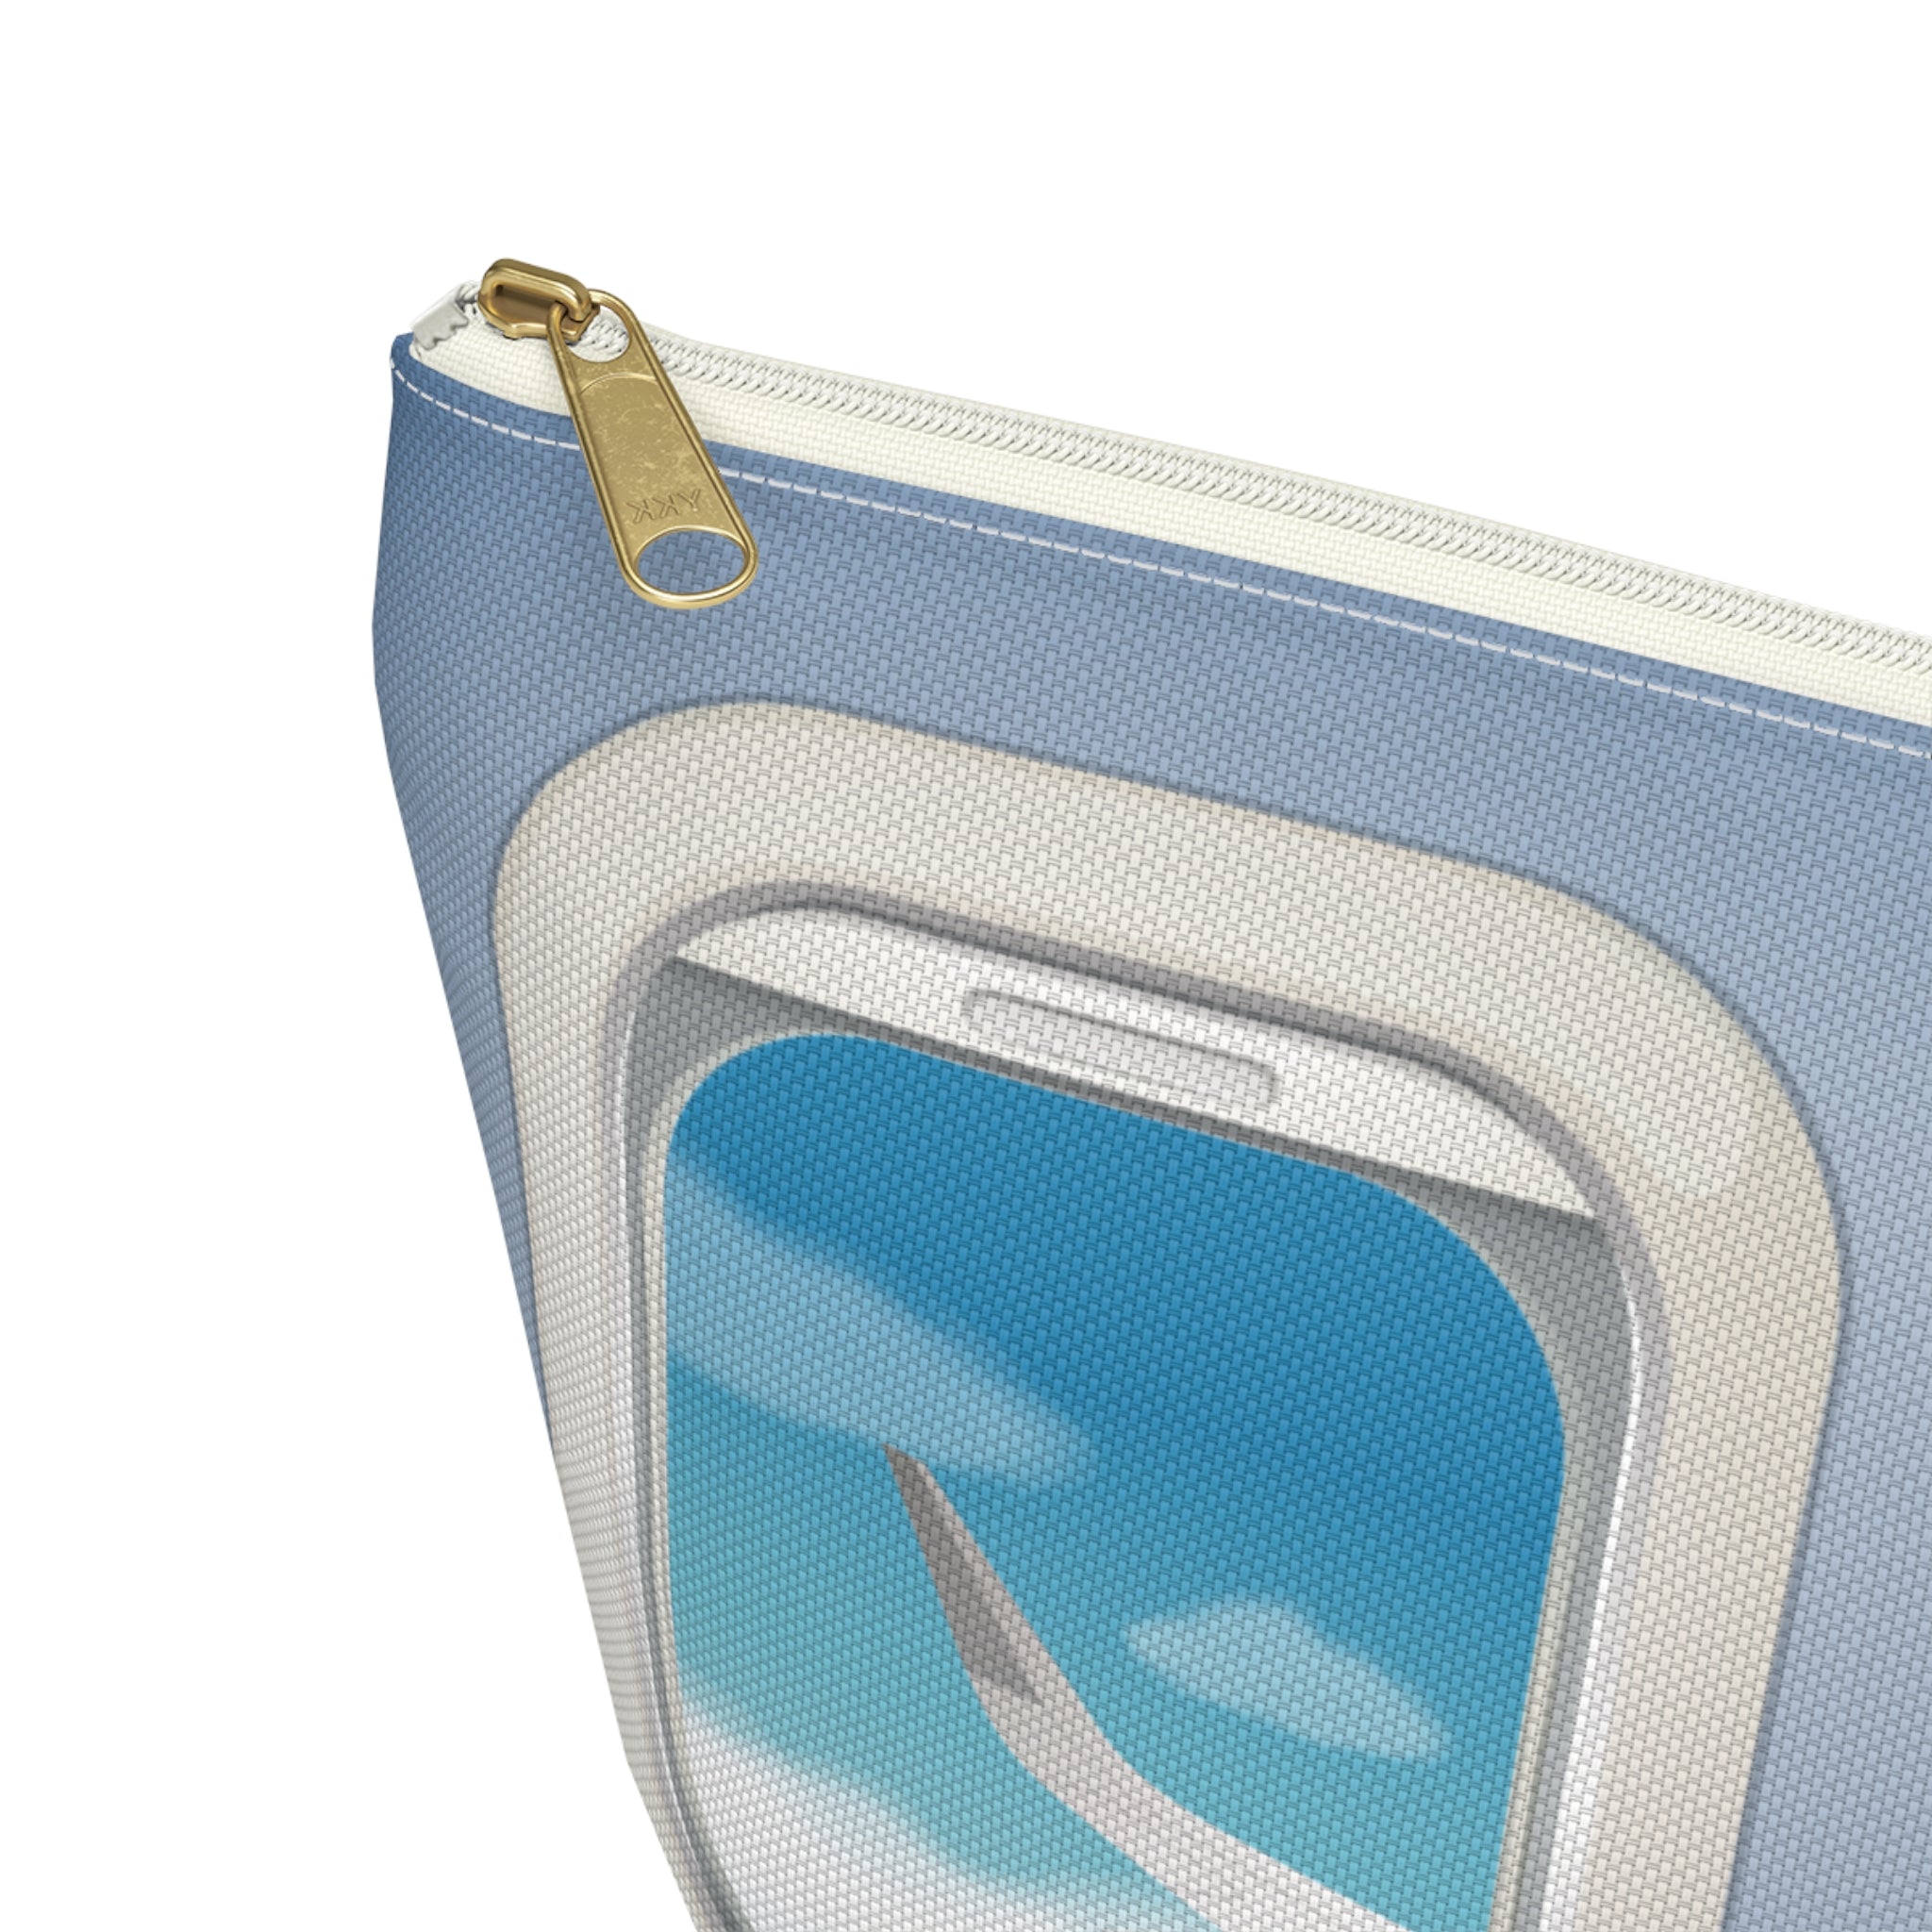 Airplane Window View T-Bottom Accessory Pouch